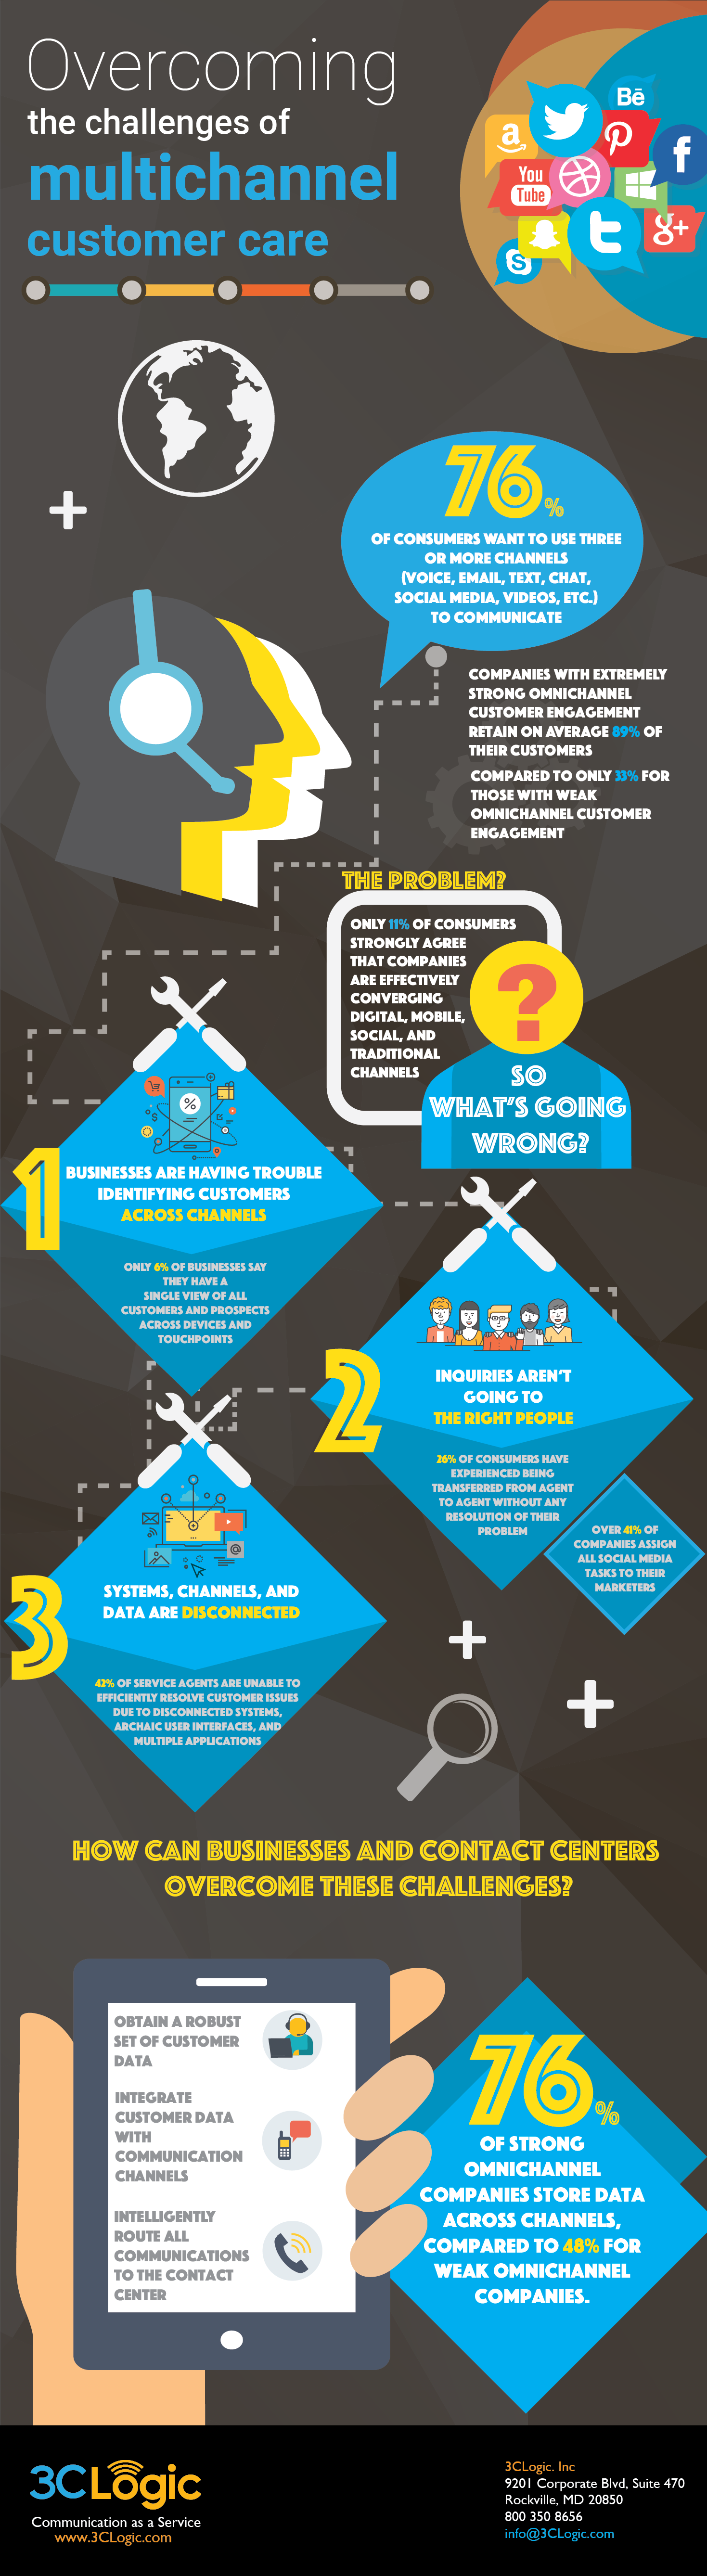 [Infographic] Overcoming the Challenges of Multichannel Customer Care